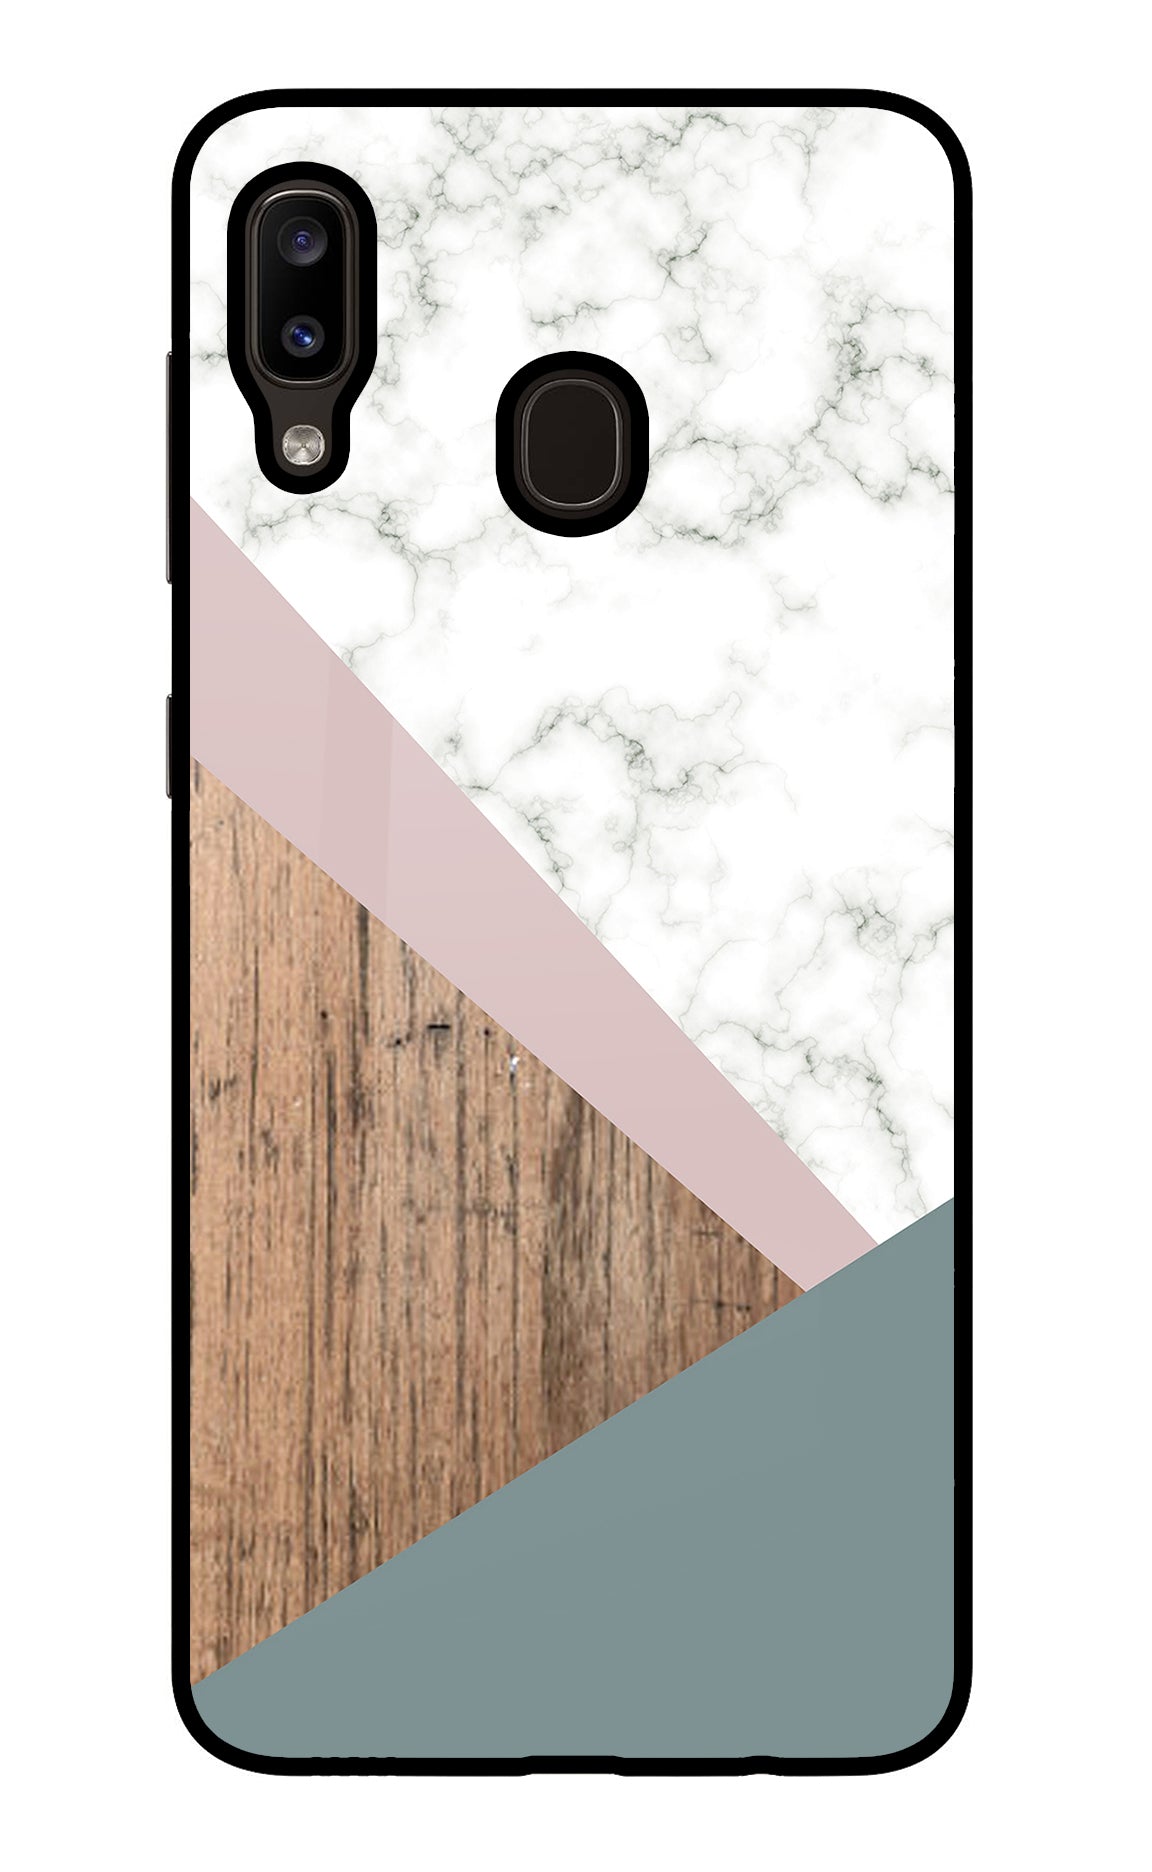 Marble wood Abstract Samsung A20/M10s Back Cover